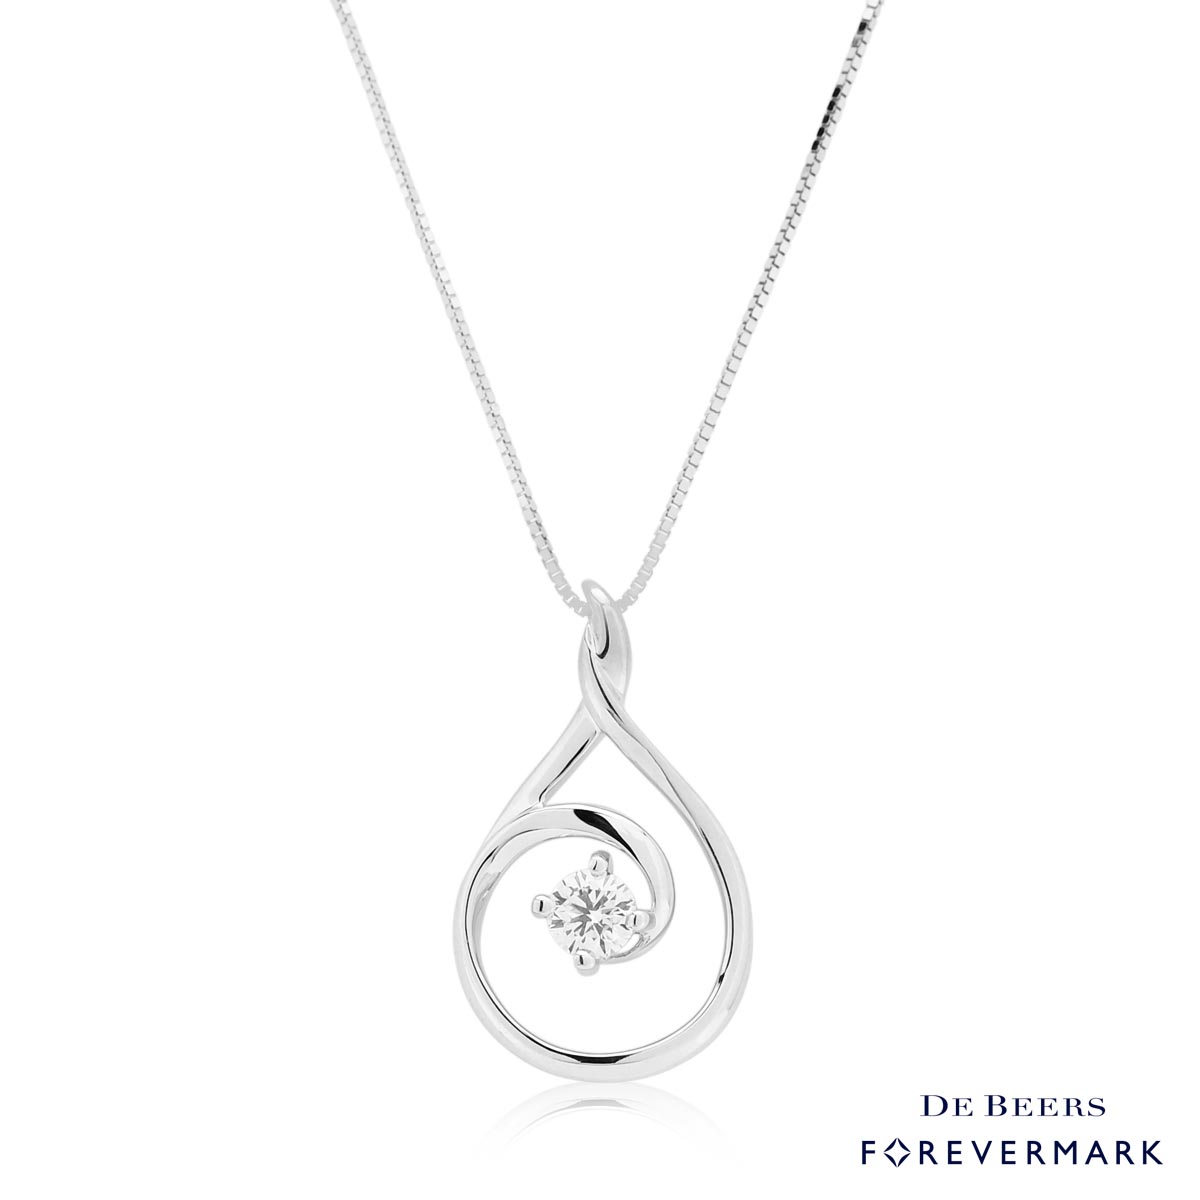 De Beers Forevermark Diamond Necklace in 14kt White Gold (1/7ct)